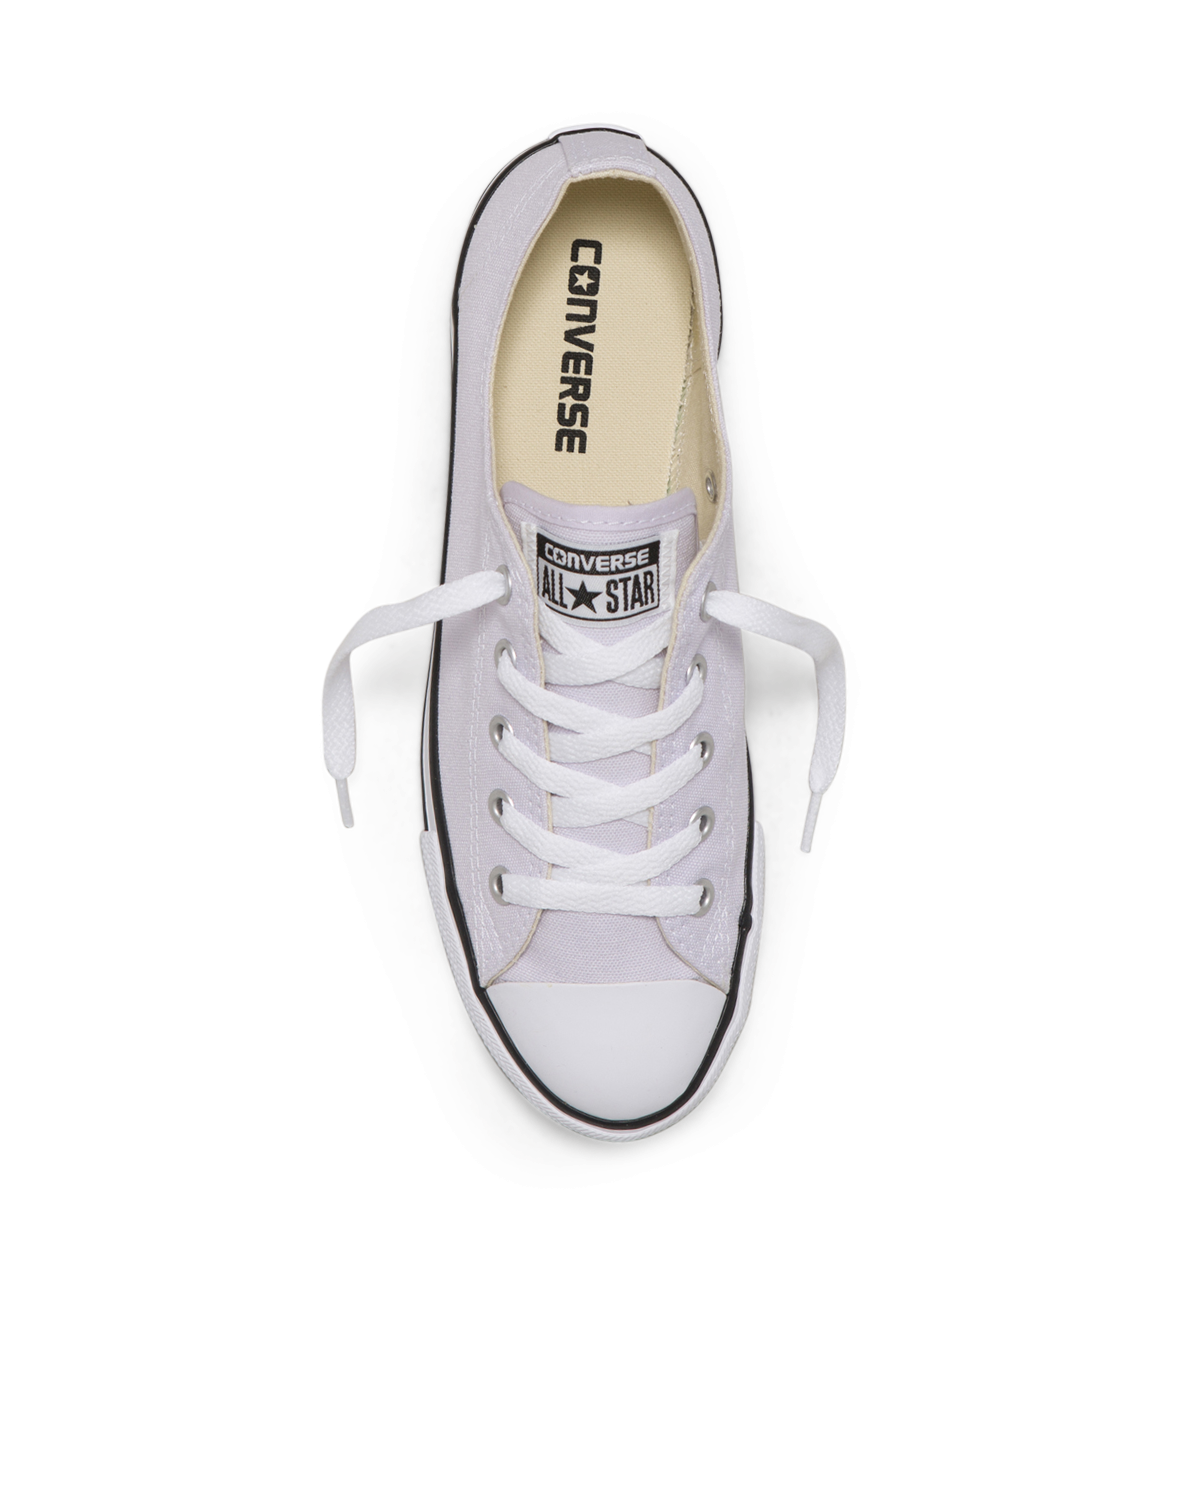 Converse clipart one shoe. Chuck taylor dainty canvas